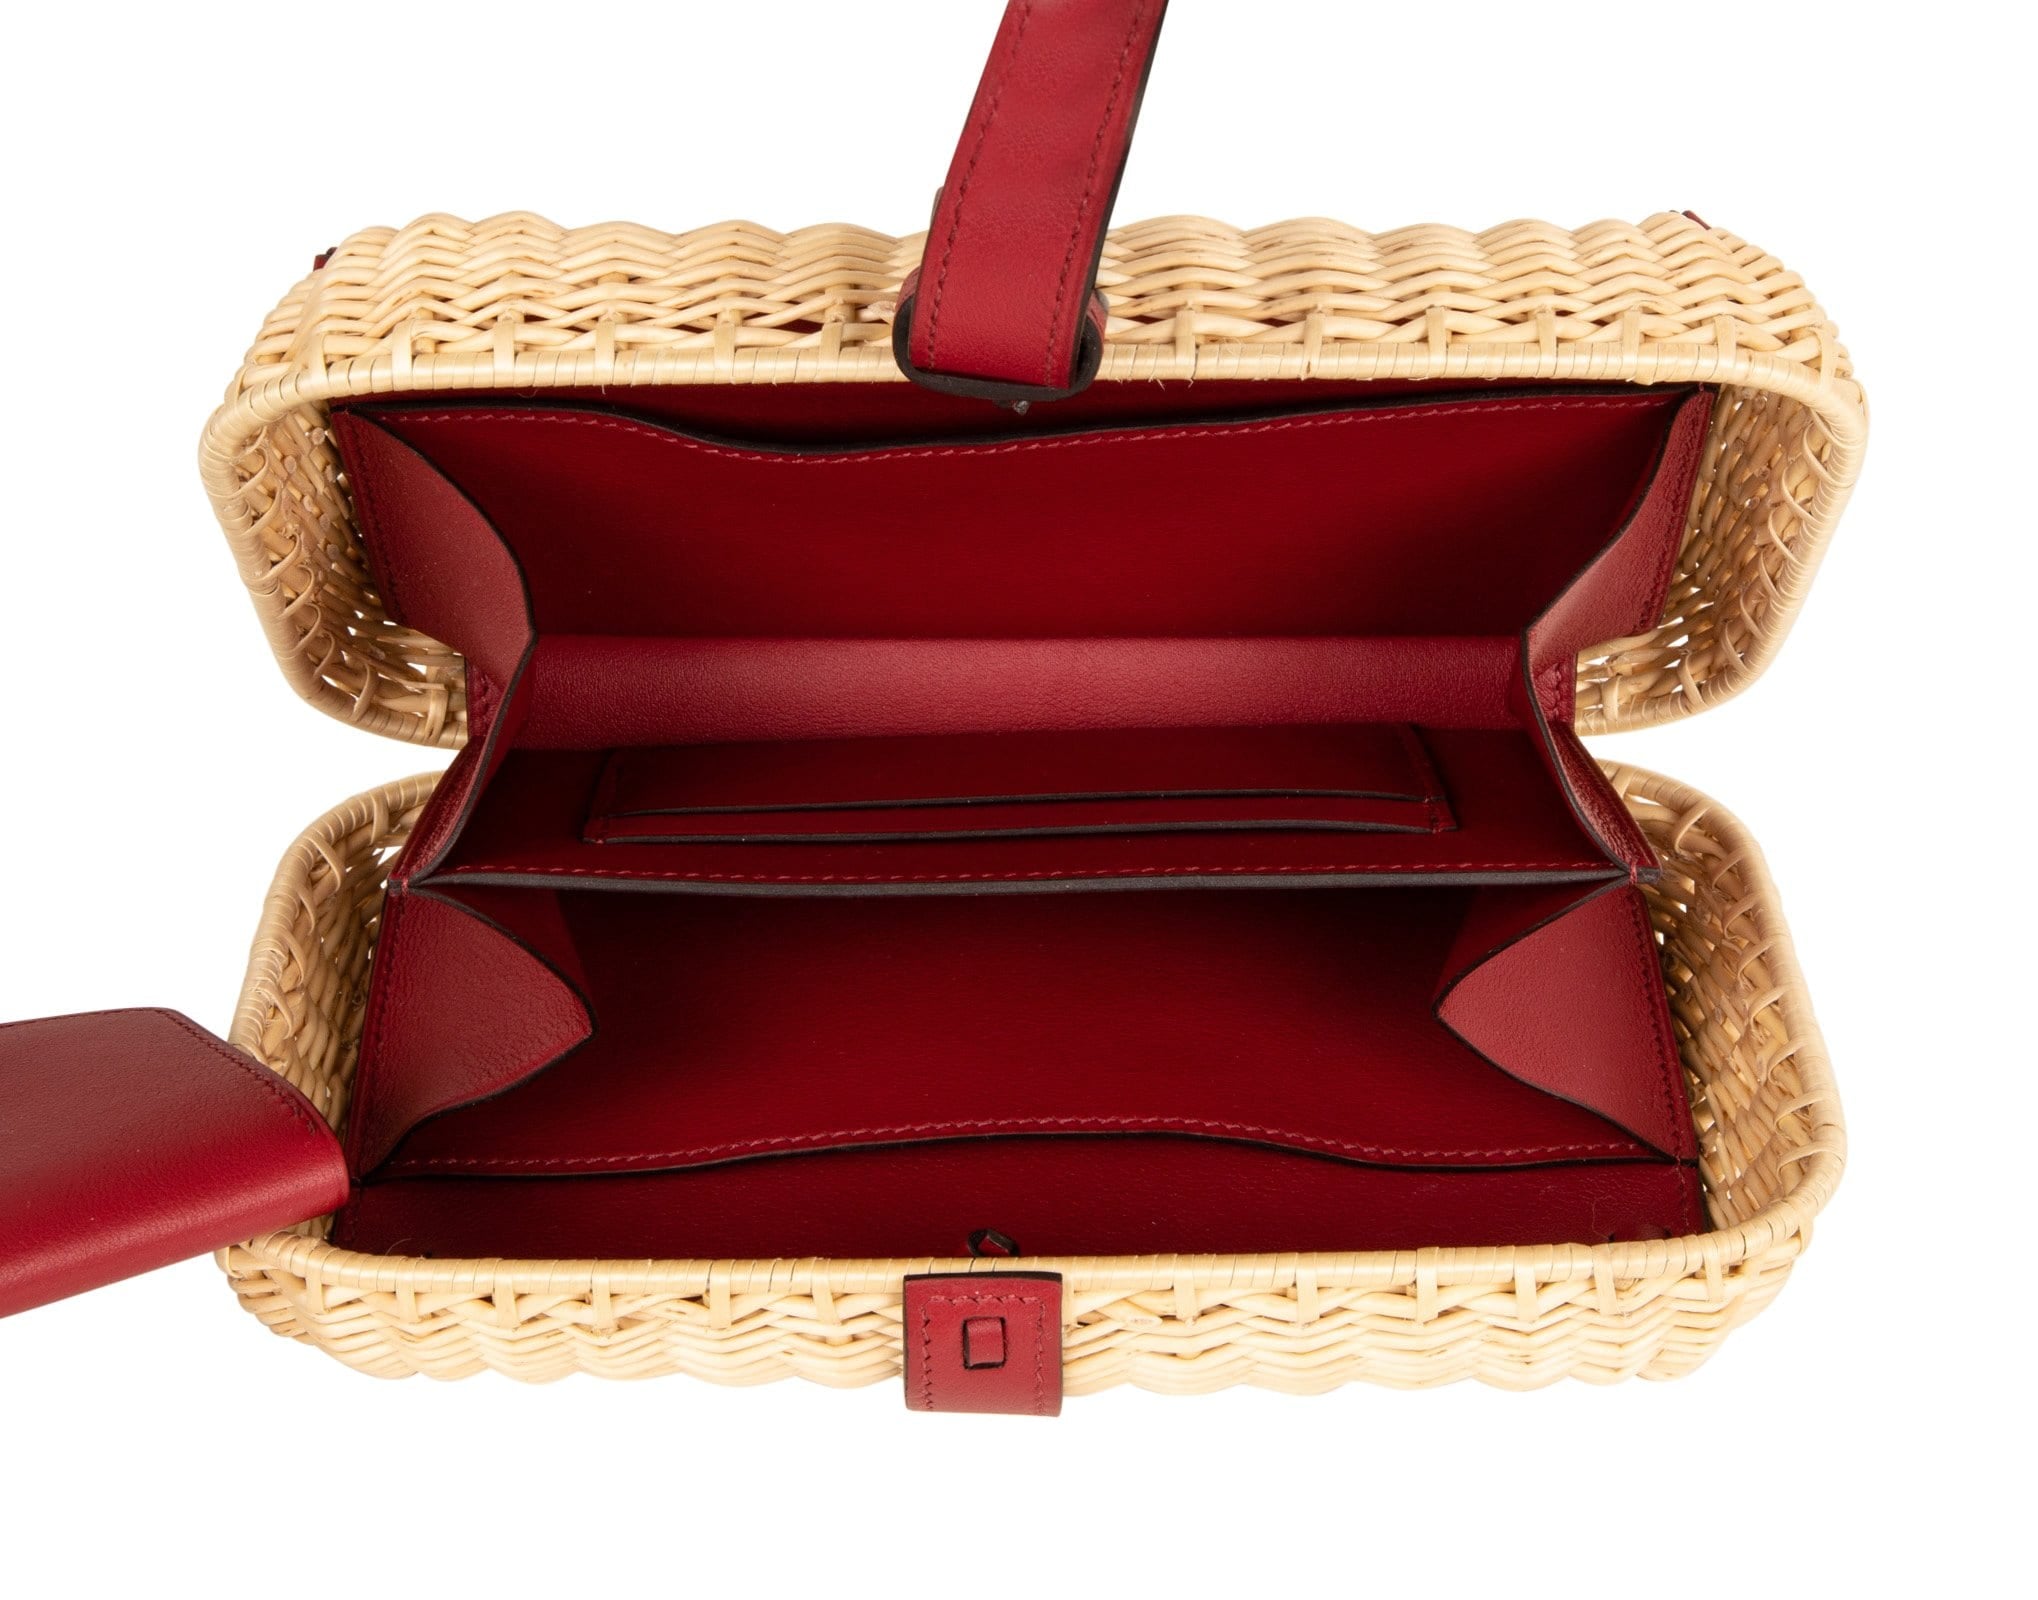 Hermes Limited Edition Bolide Picnic Bag in Osier Wicker and Barenia L –  Mightychic